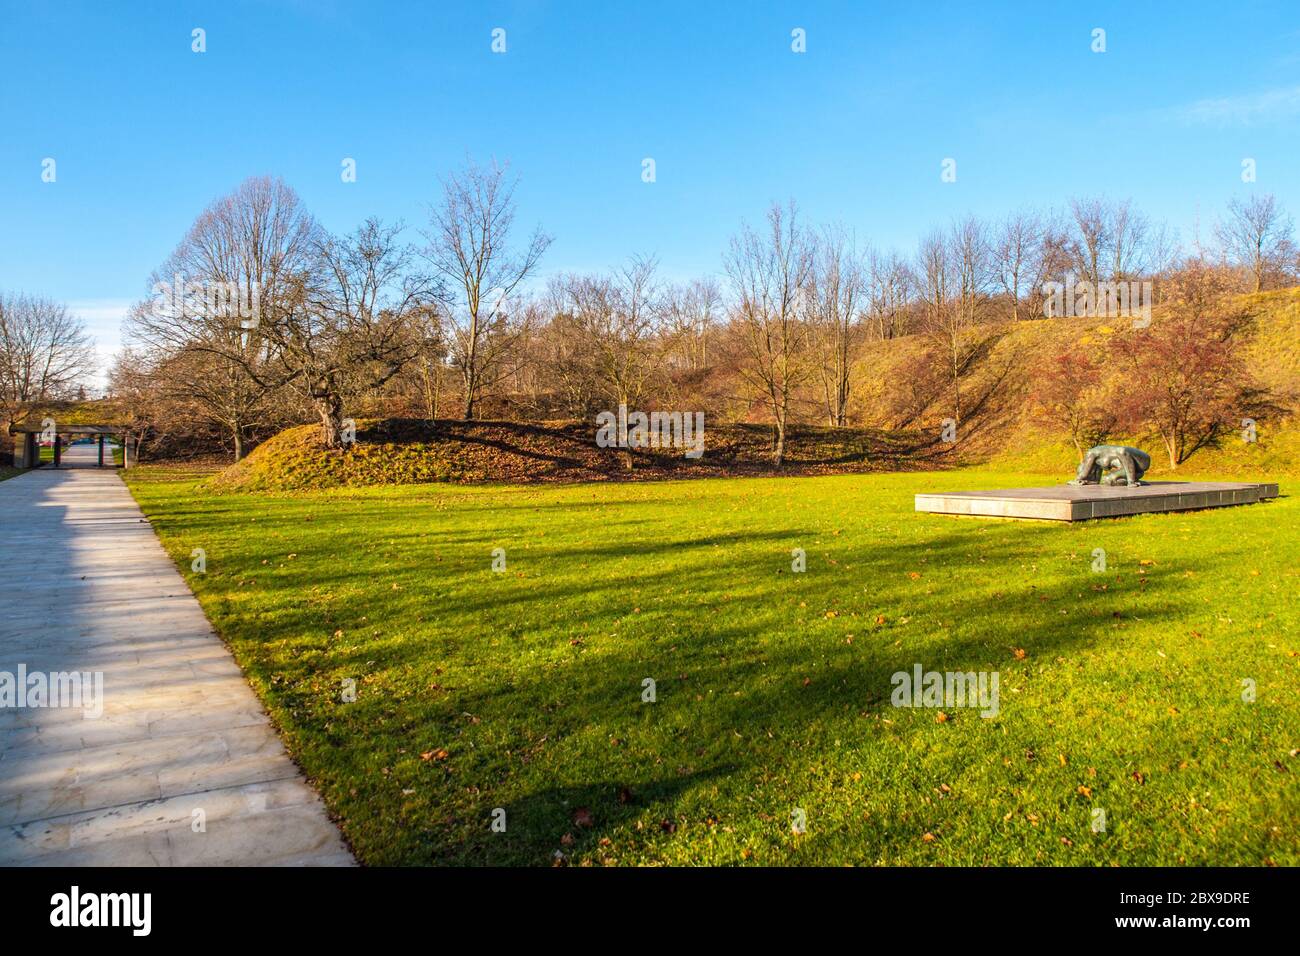 PRAGUE, CZECH REPUBLIC - DECEMBER 9, 2017: Former Kobylisy Shooting Range, Prague, Czech Republic. Place of mass executions during WWII by Nazis after the assassination of Reinhard Heydrich. Stock Photo